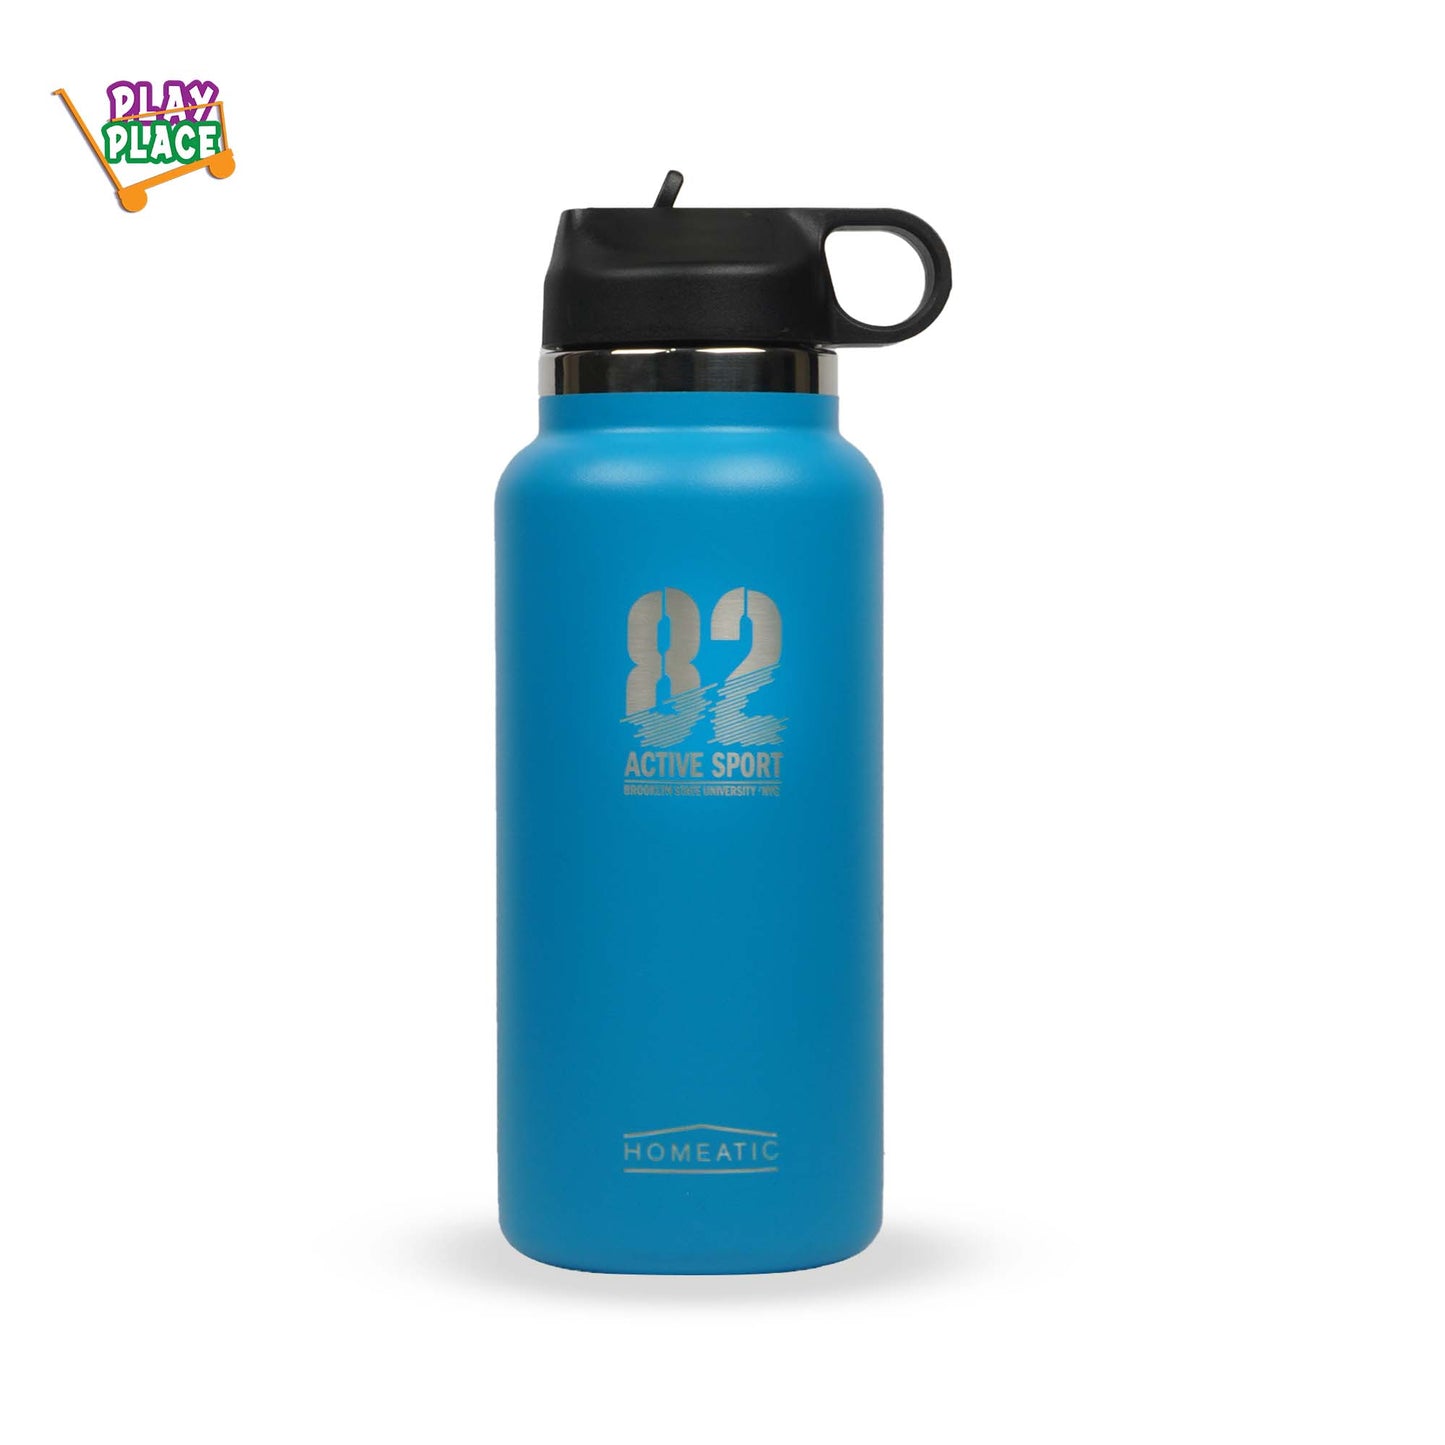 Homeatic 82 Active sport Insulated flask - Blue